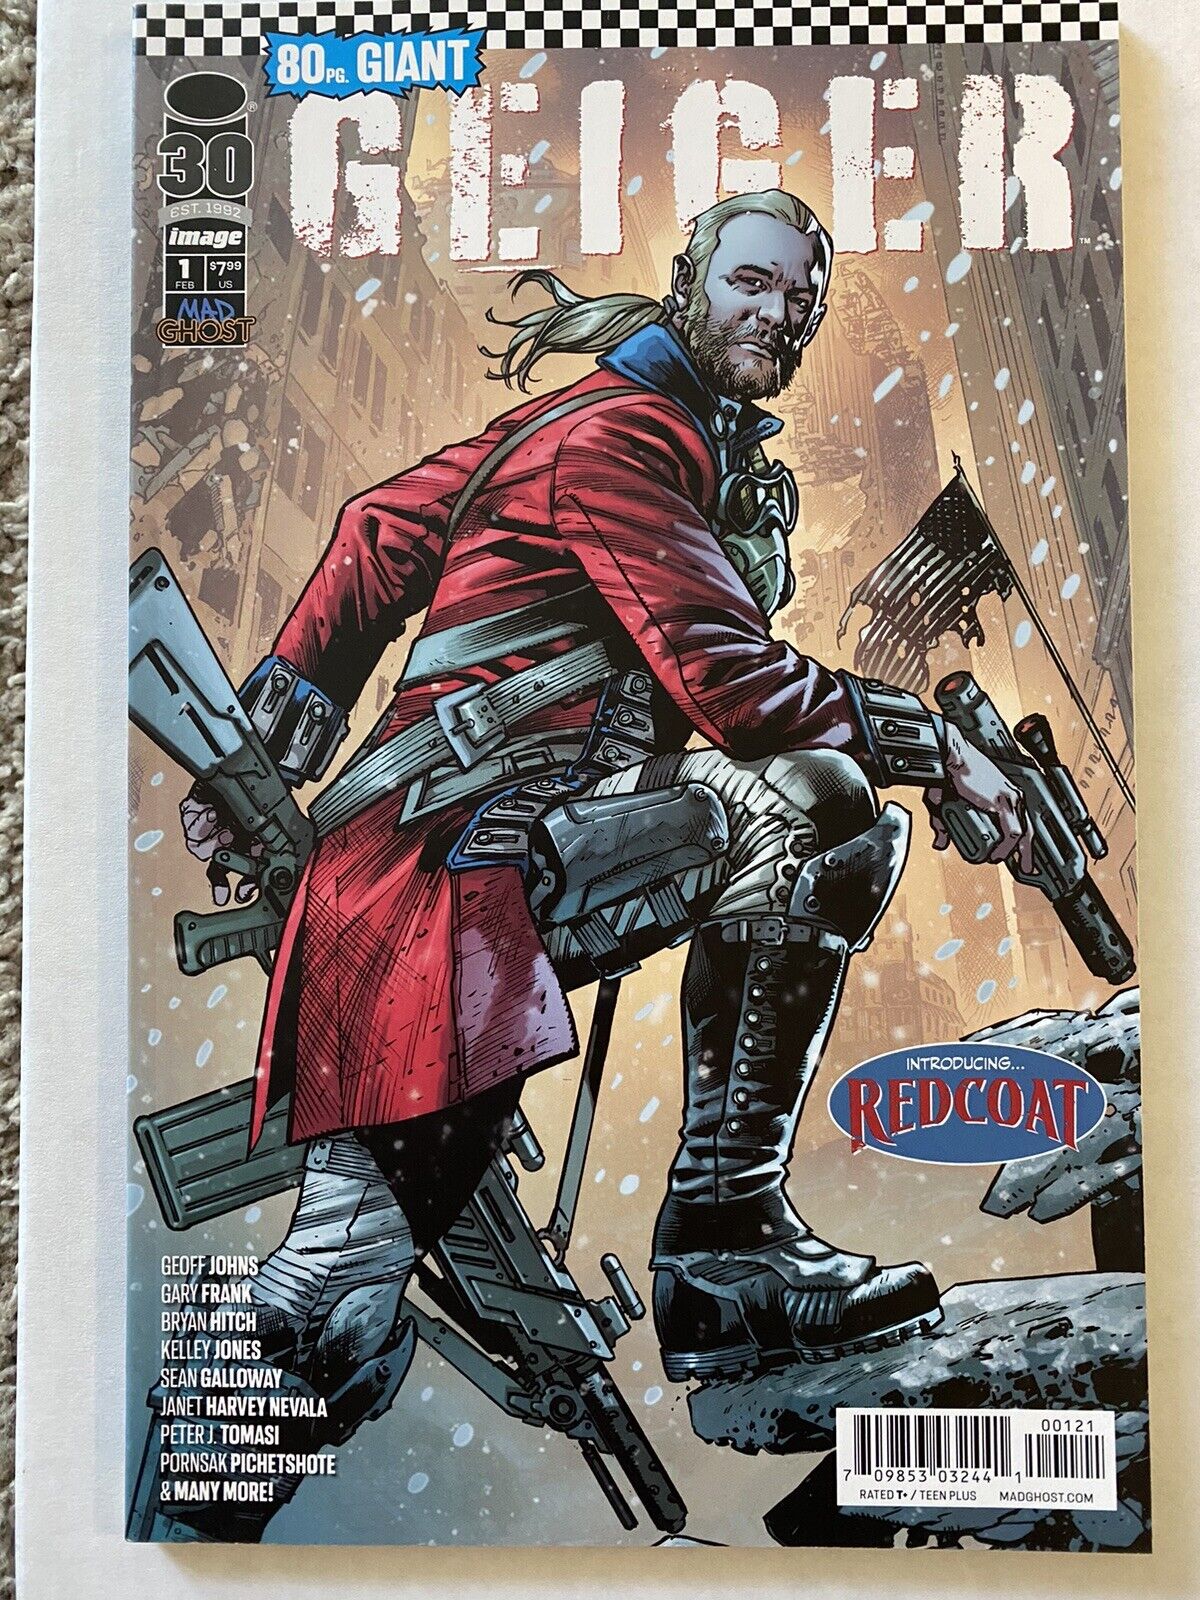 Geiger 80 Page Giant 1 Bryan Hitch Variant 1st App & Cover Redcoat Image 2022 NM